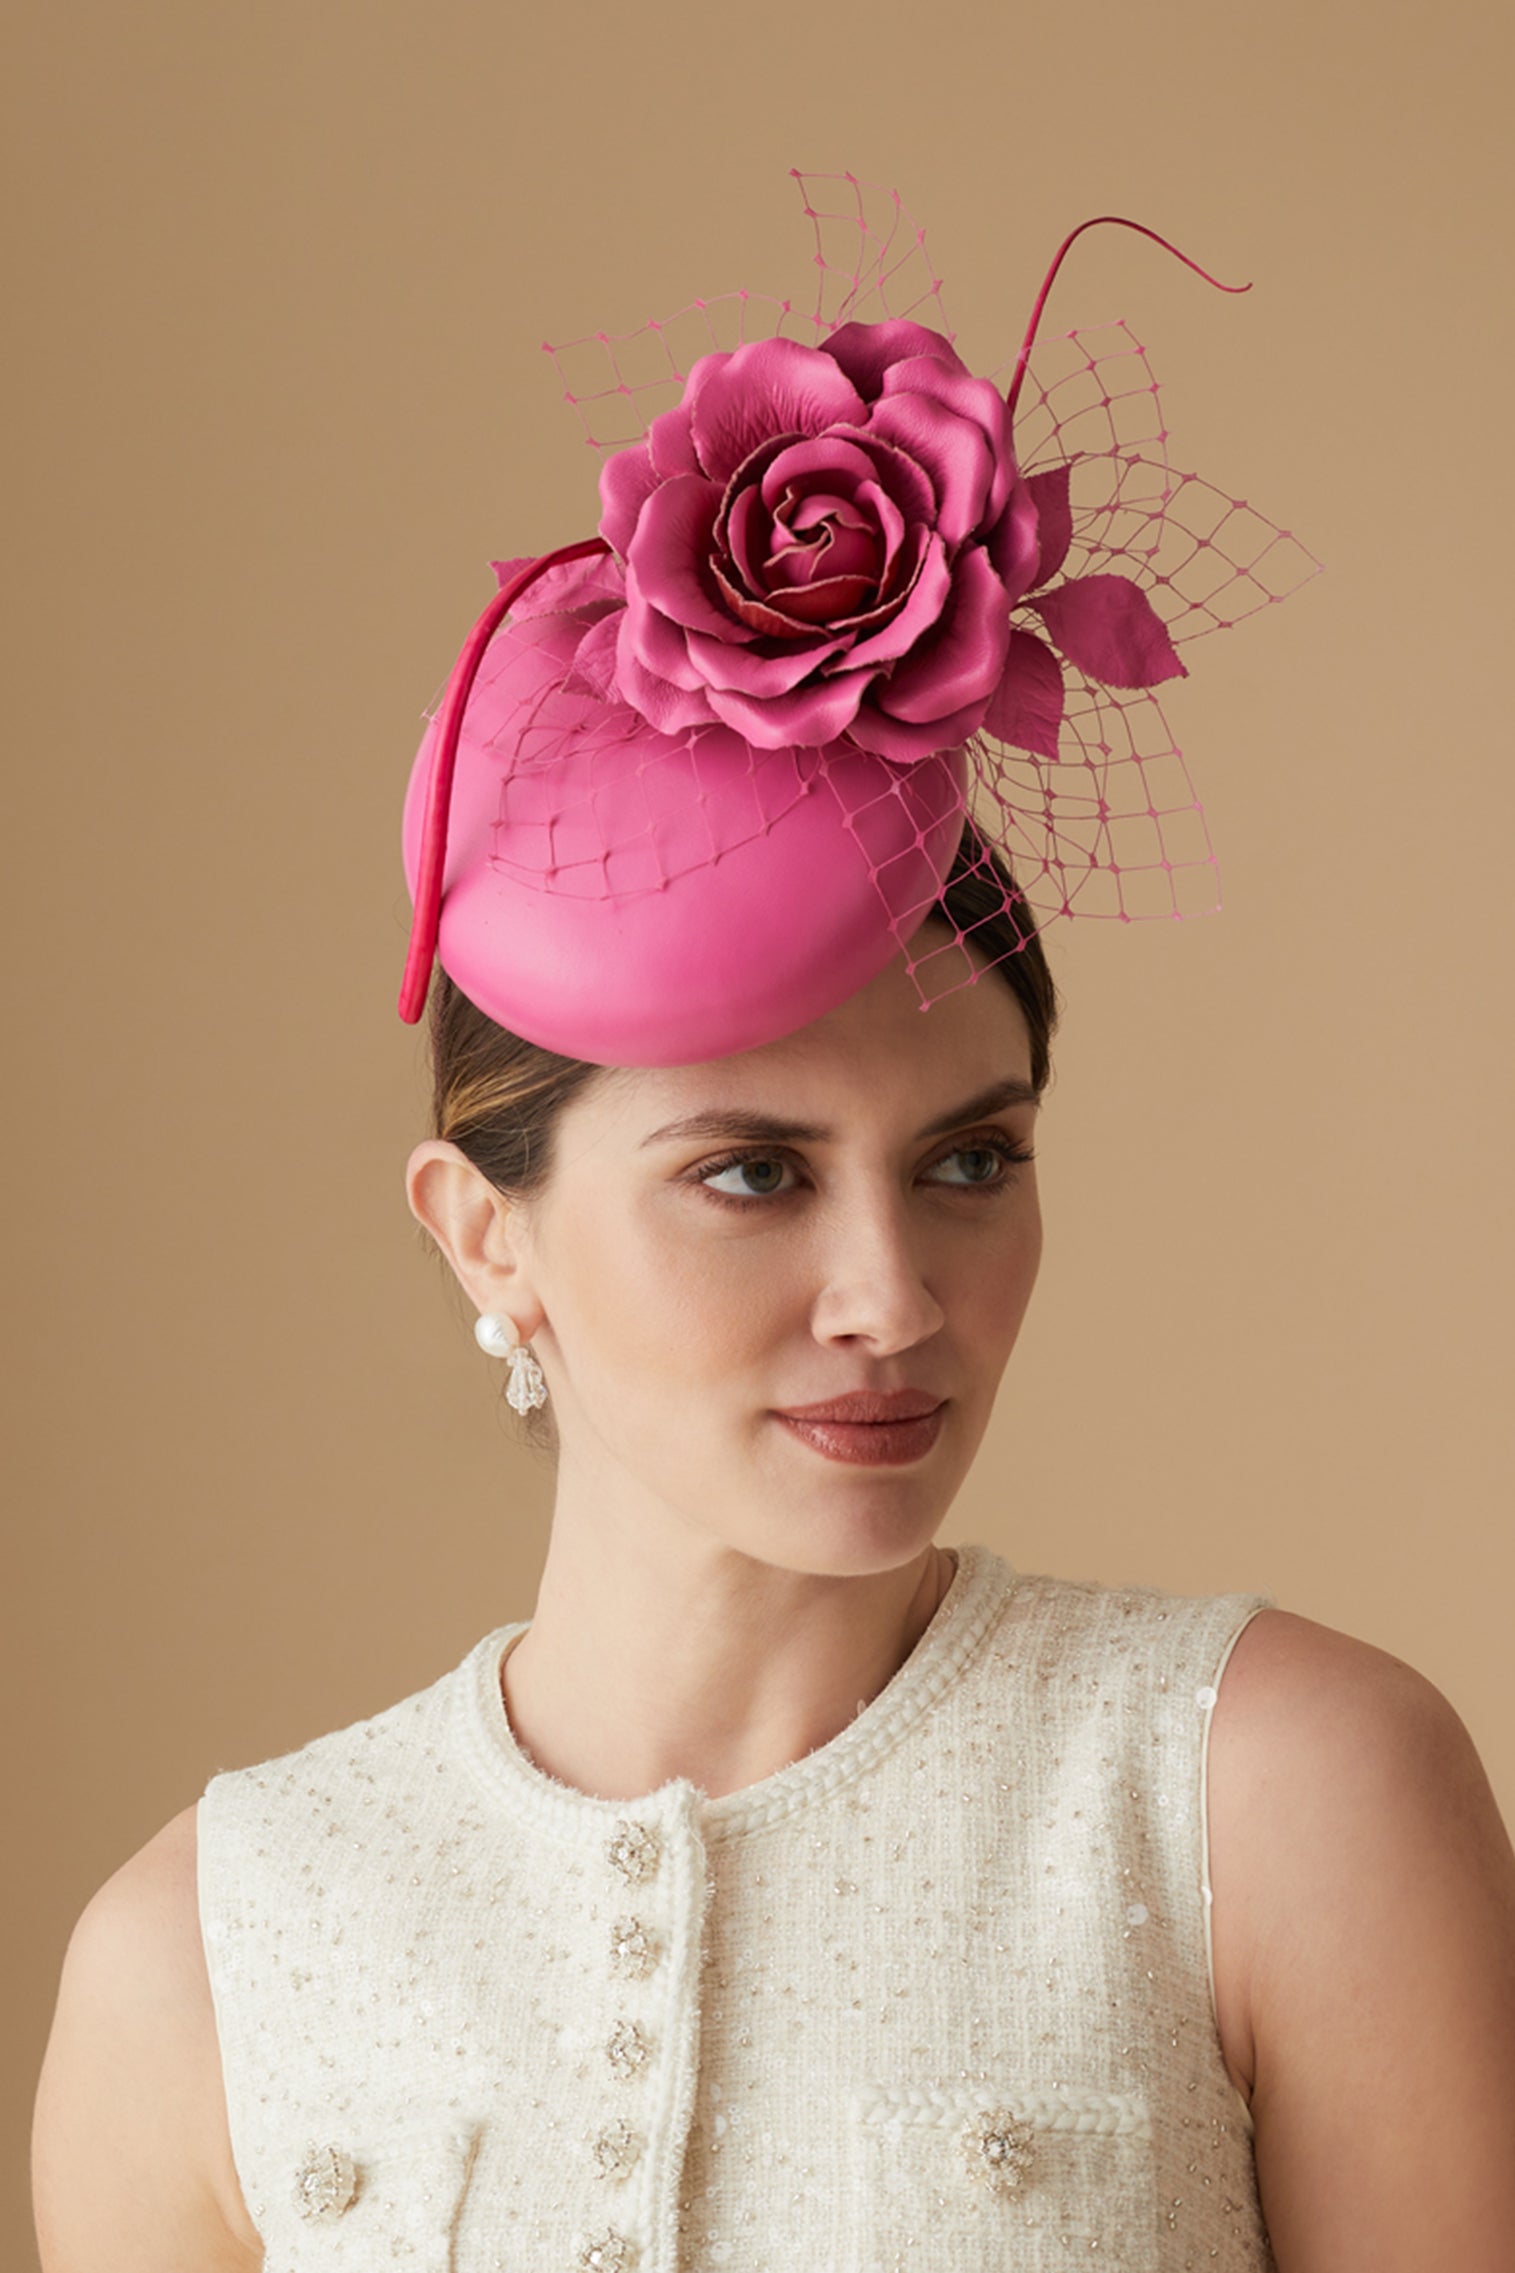 Rose Bud Pink Leather Percher Hat - Lock Couture by Awon Golding - Lock & Co. Hatters London UK